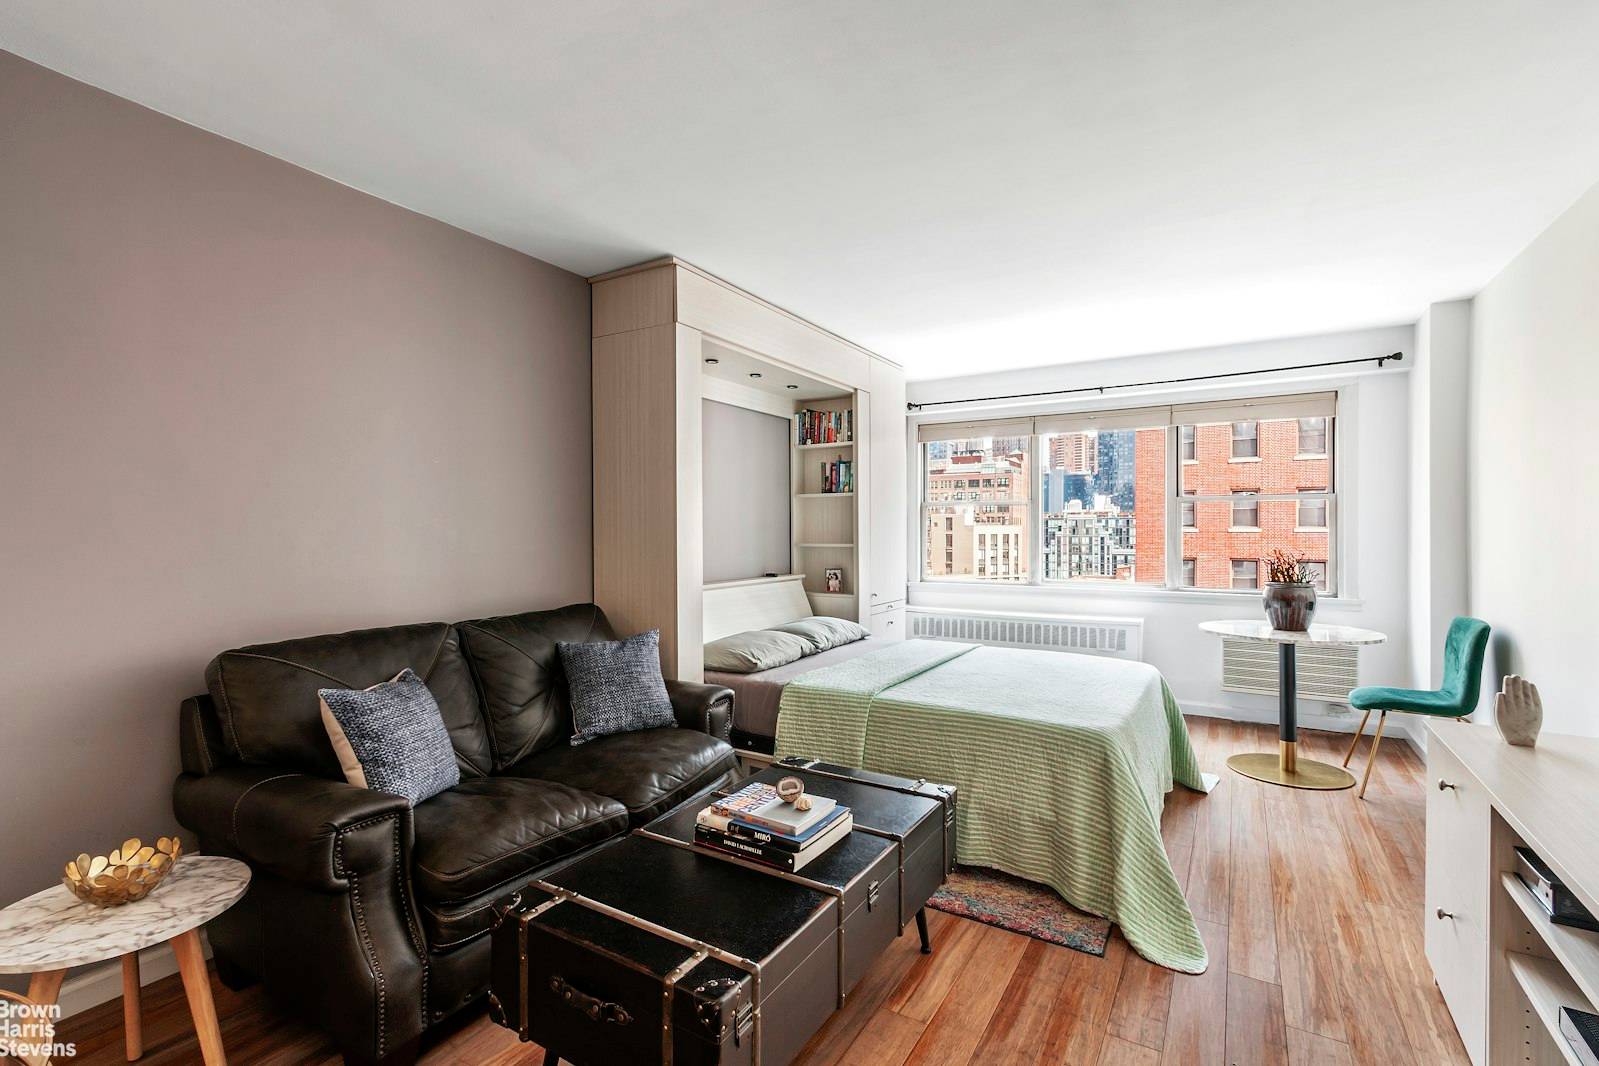 Perched high up on the 12th floor, this renovated studio features open views of Midtown.